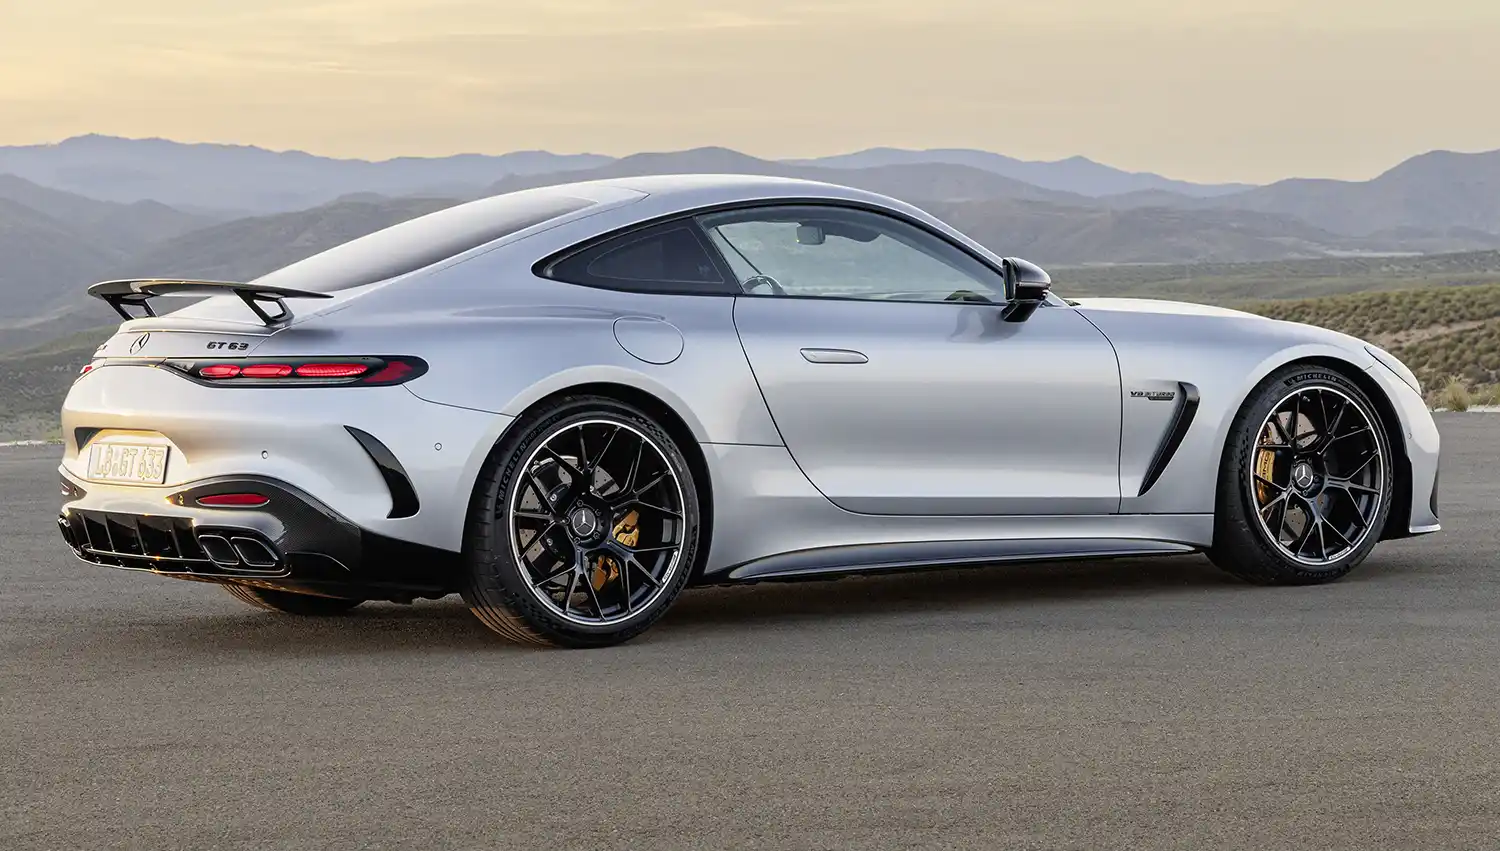 The new Mercedes-AMG GT Coupé